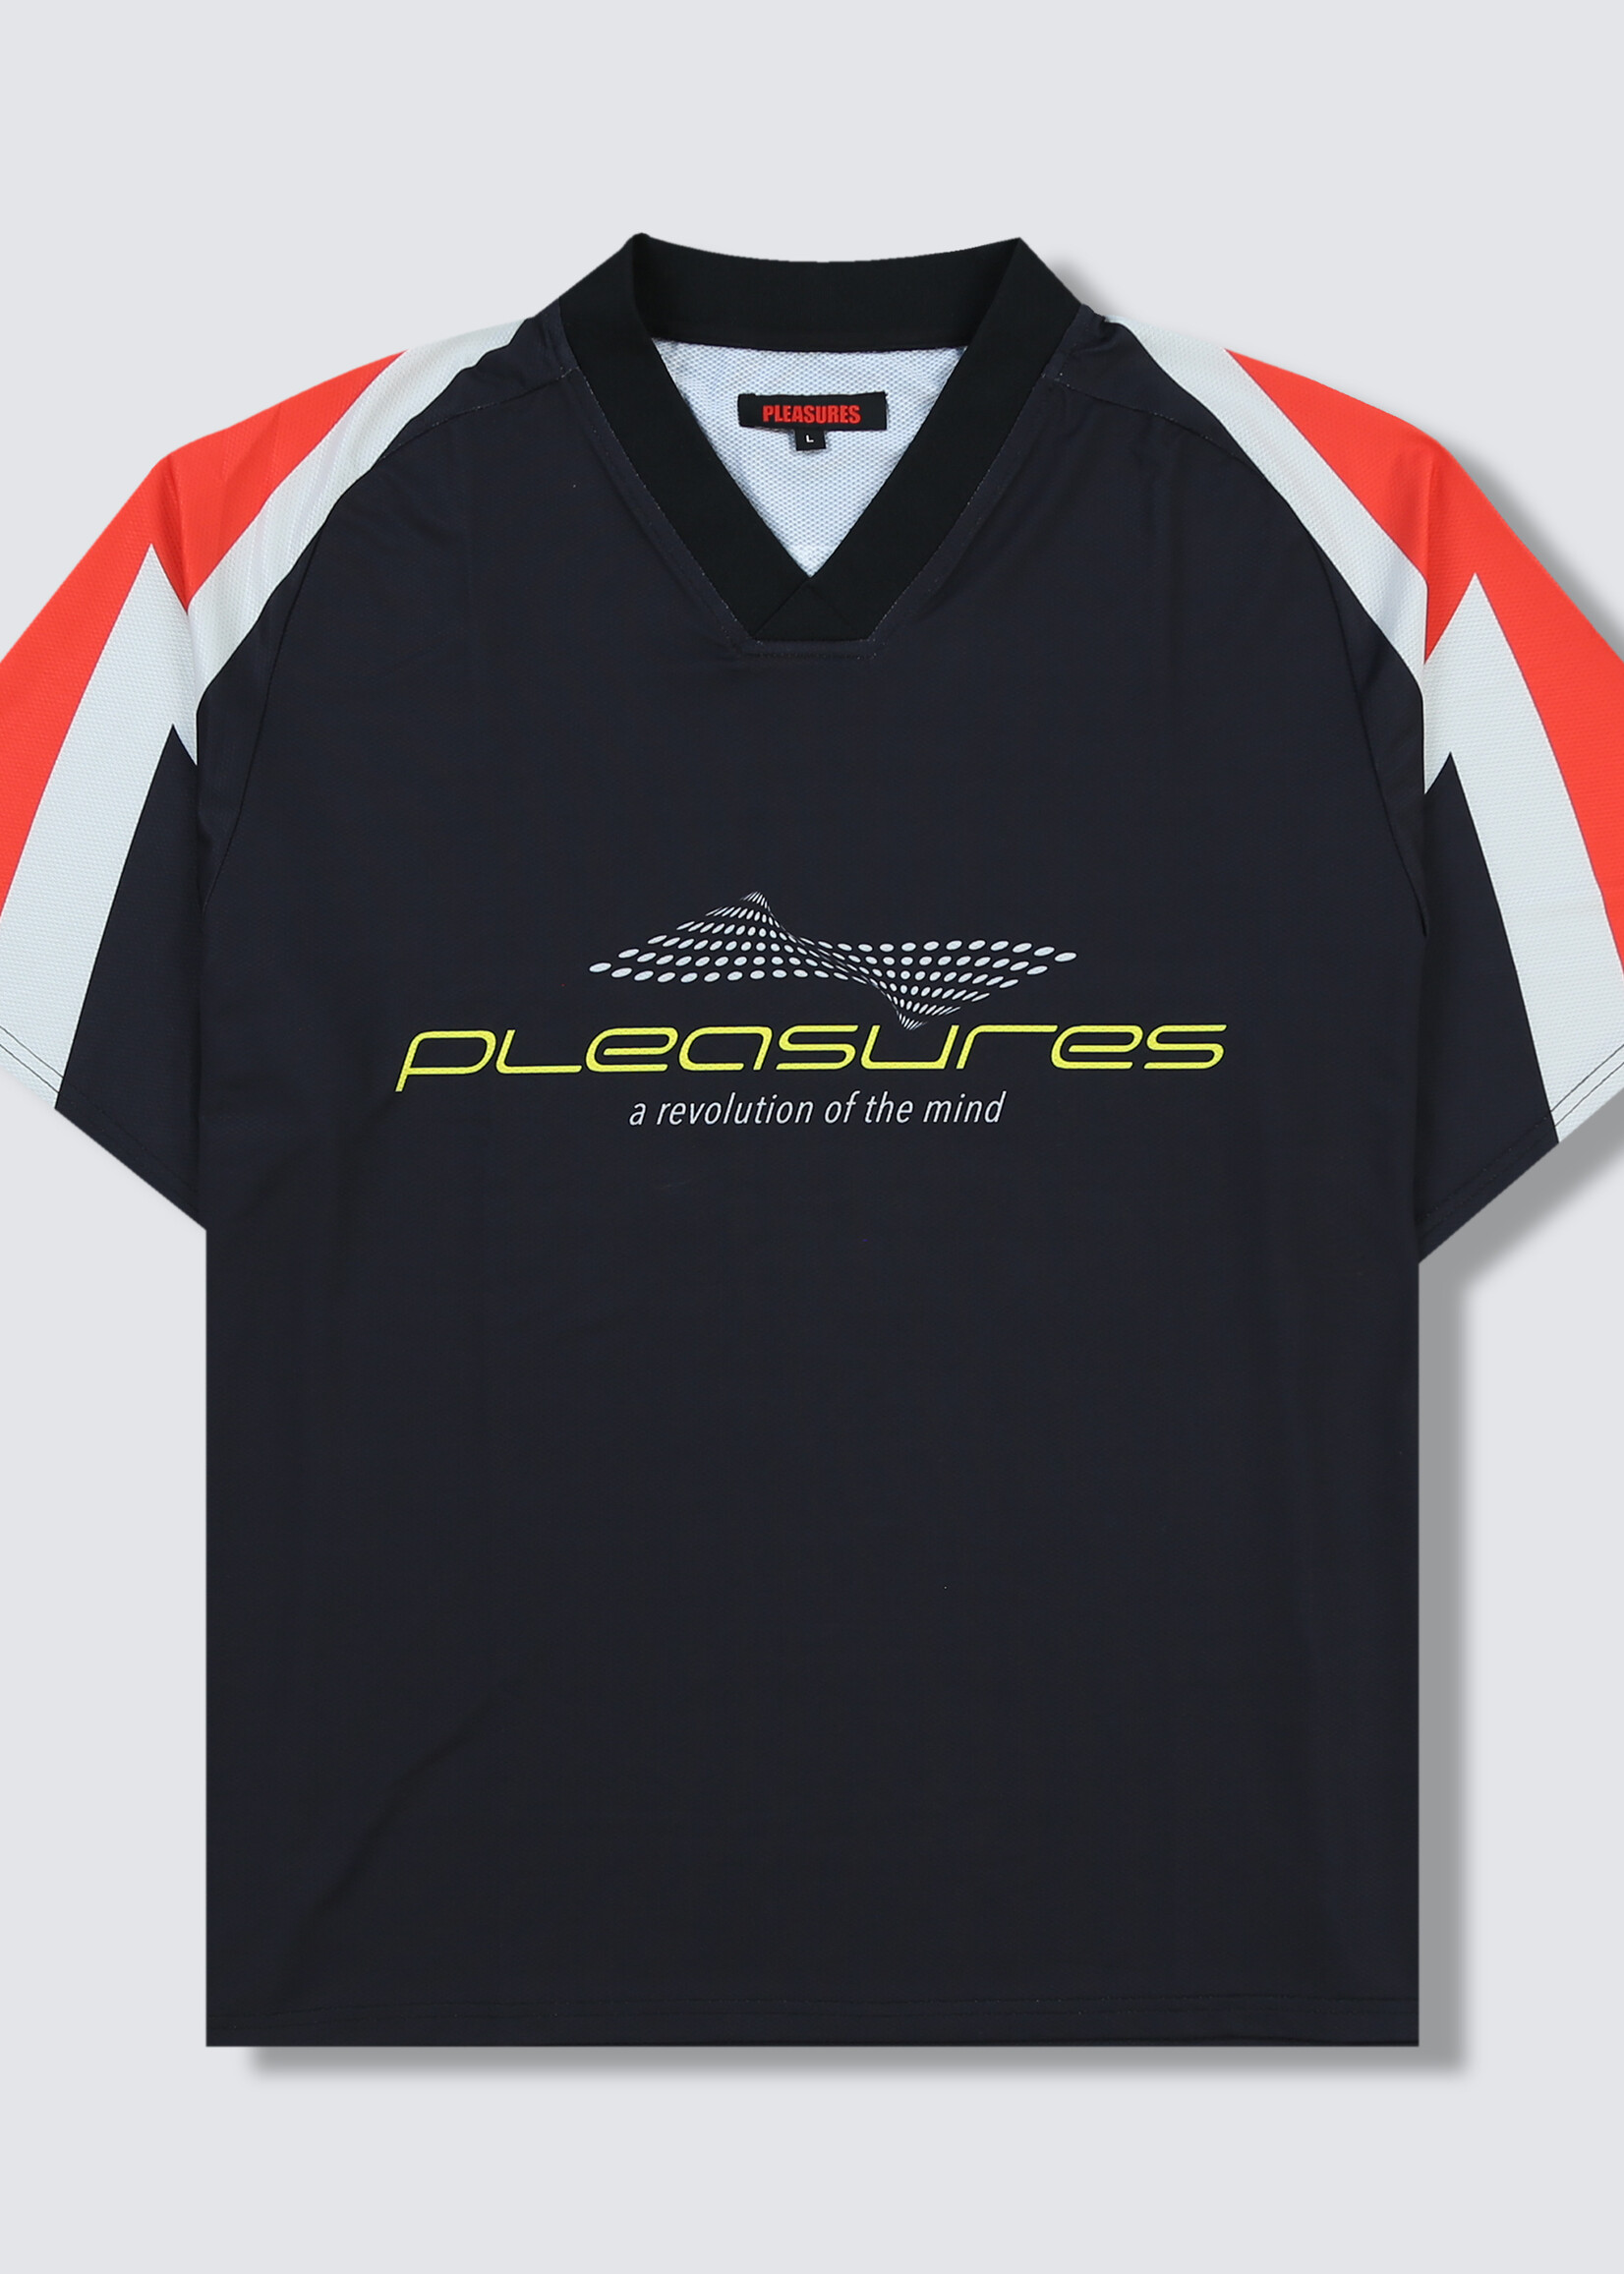 PLEASURES Mind Soccer Jersey in Black and Red